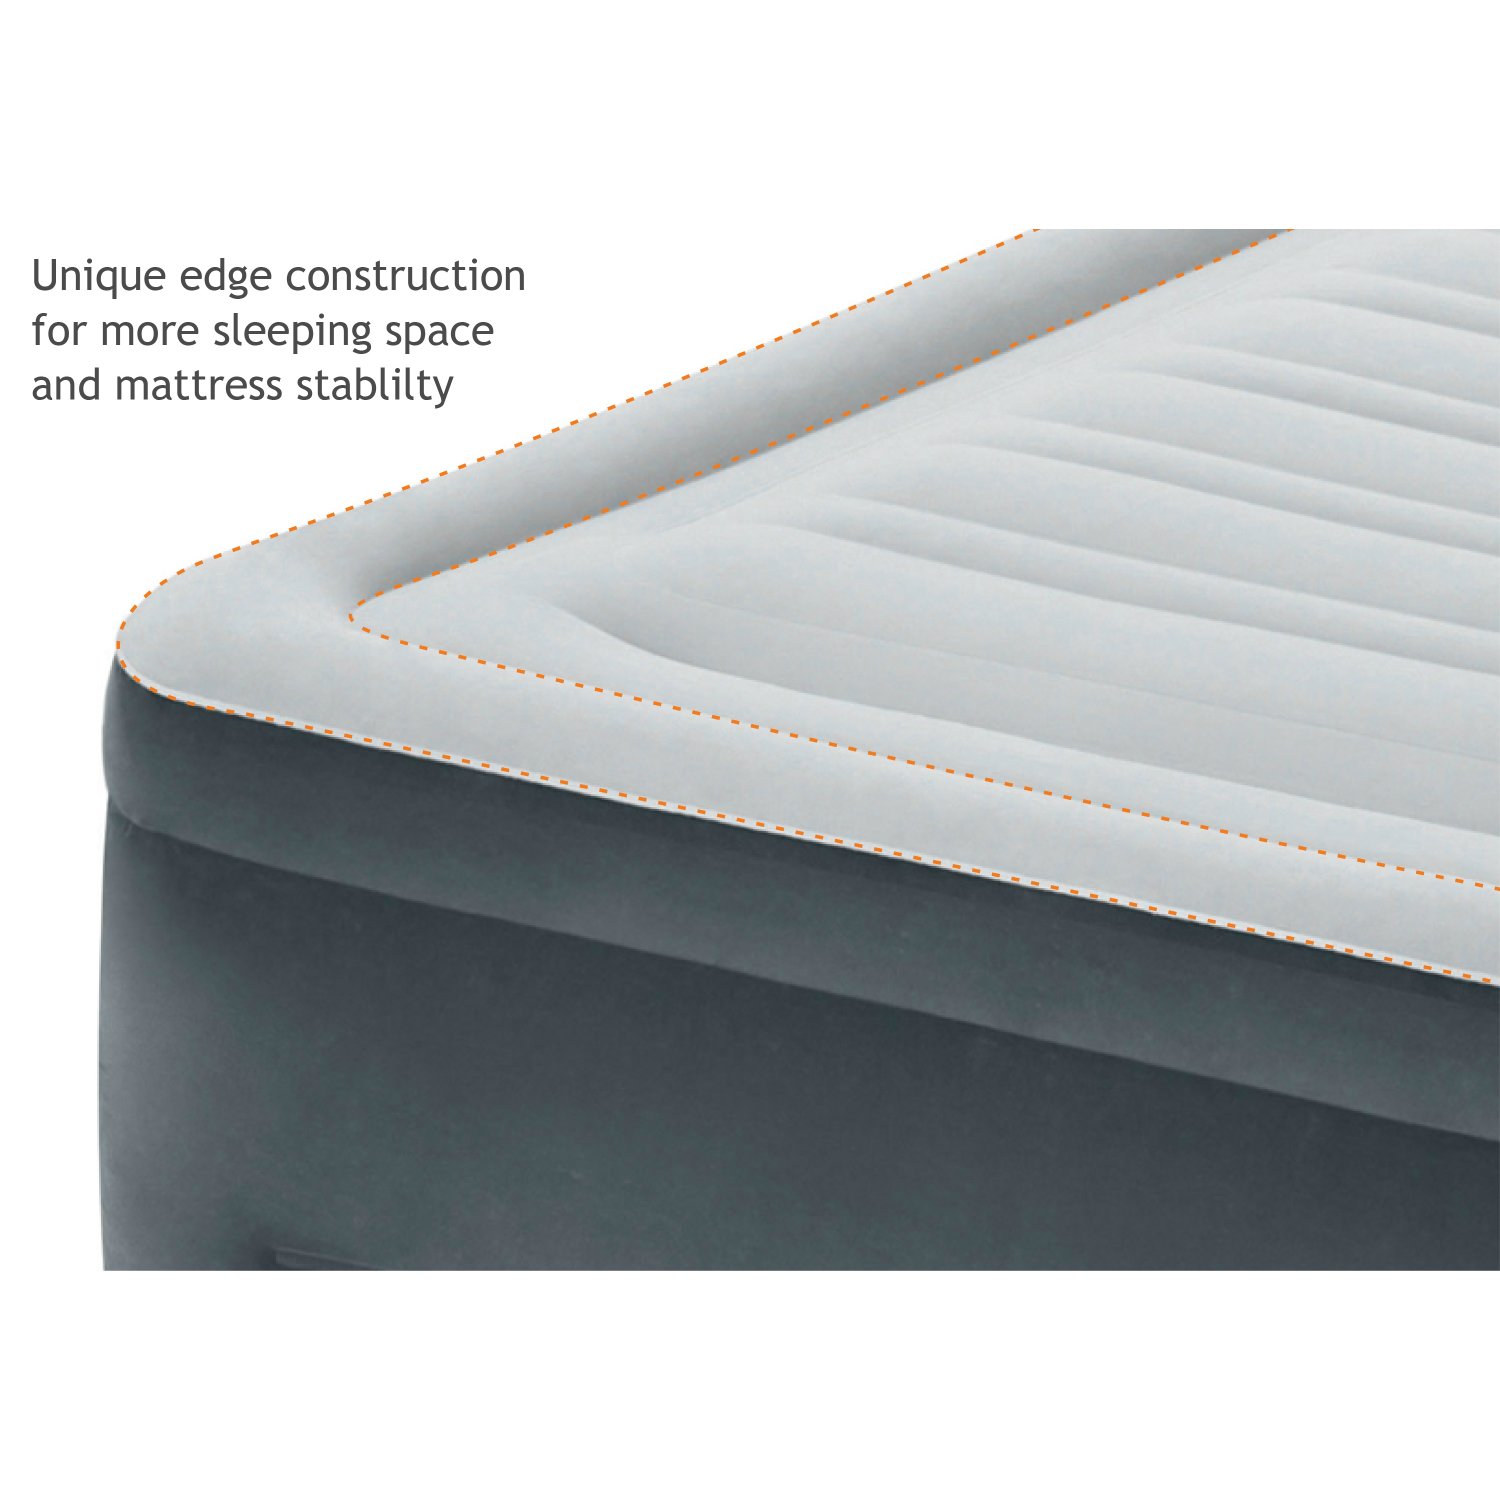 Intex Comfort Plush Elevated Dura-Beam Airbed with Built-In Electric Pump, Bed Height 22